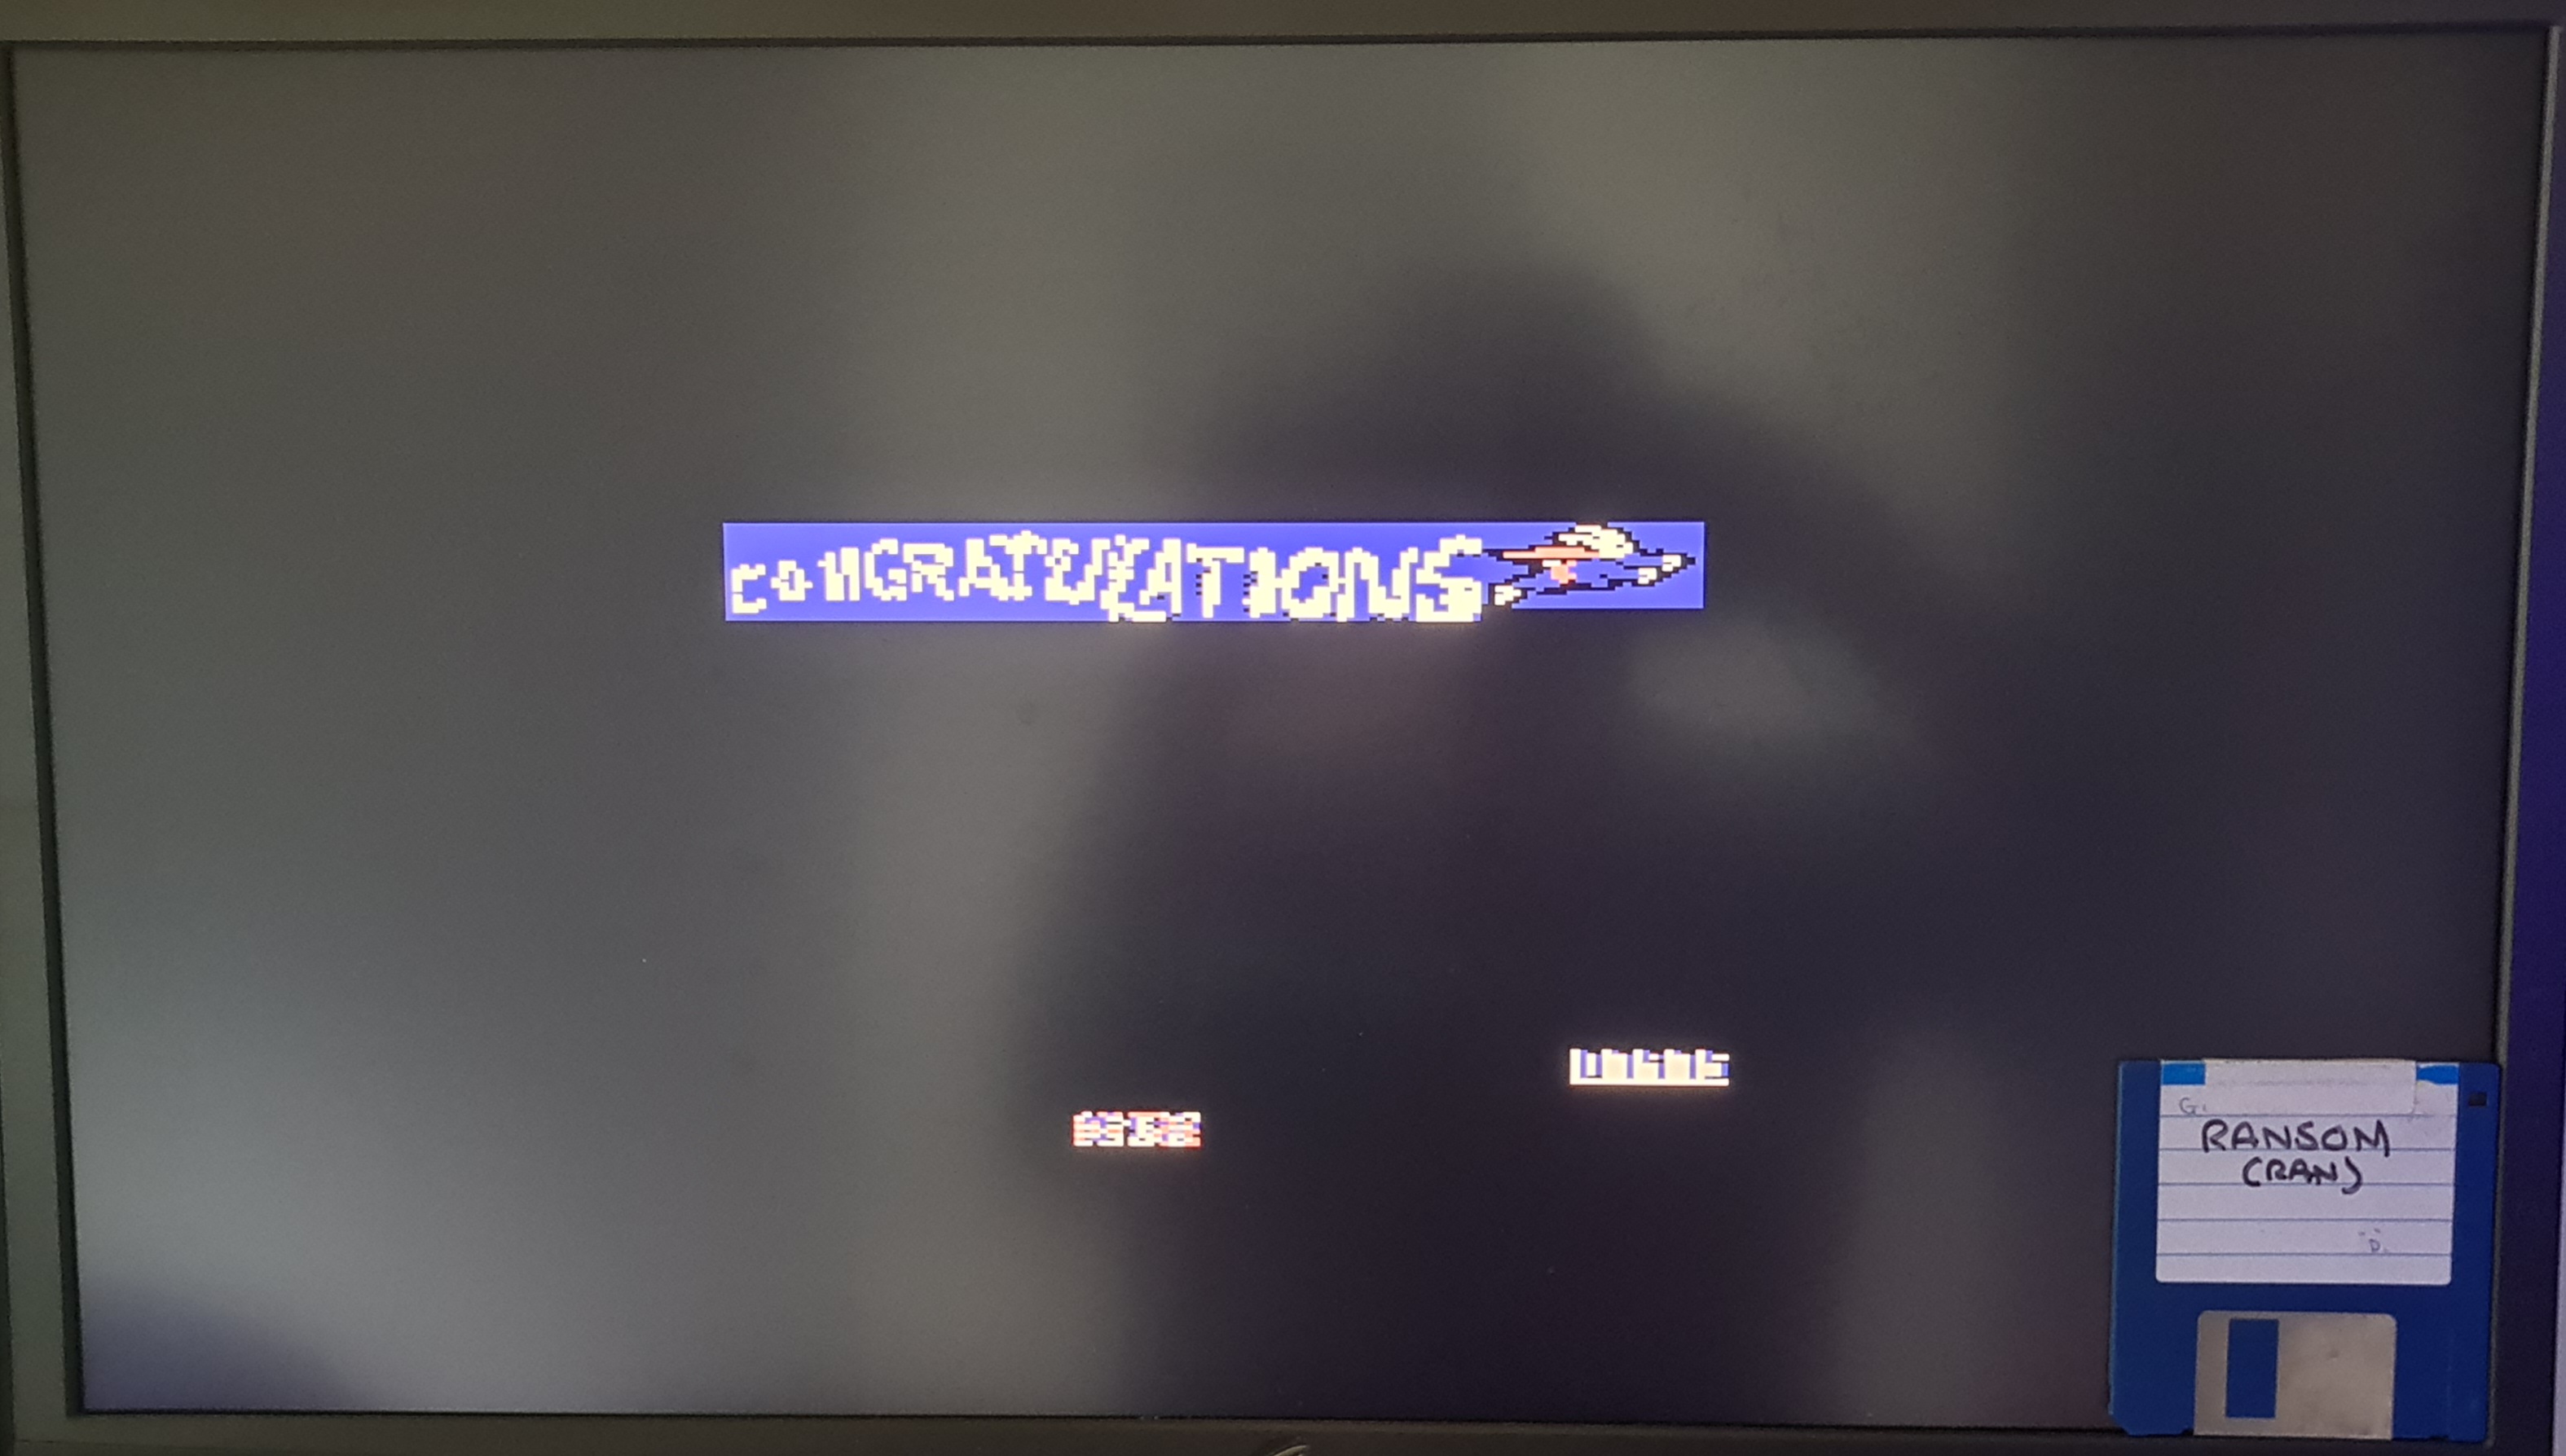 ransom: Super Bunny (Commodore 64 Emulated) 7,975 points on 2022-11-19 23:09:18